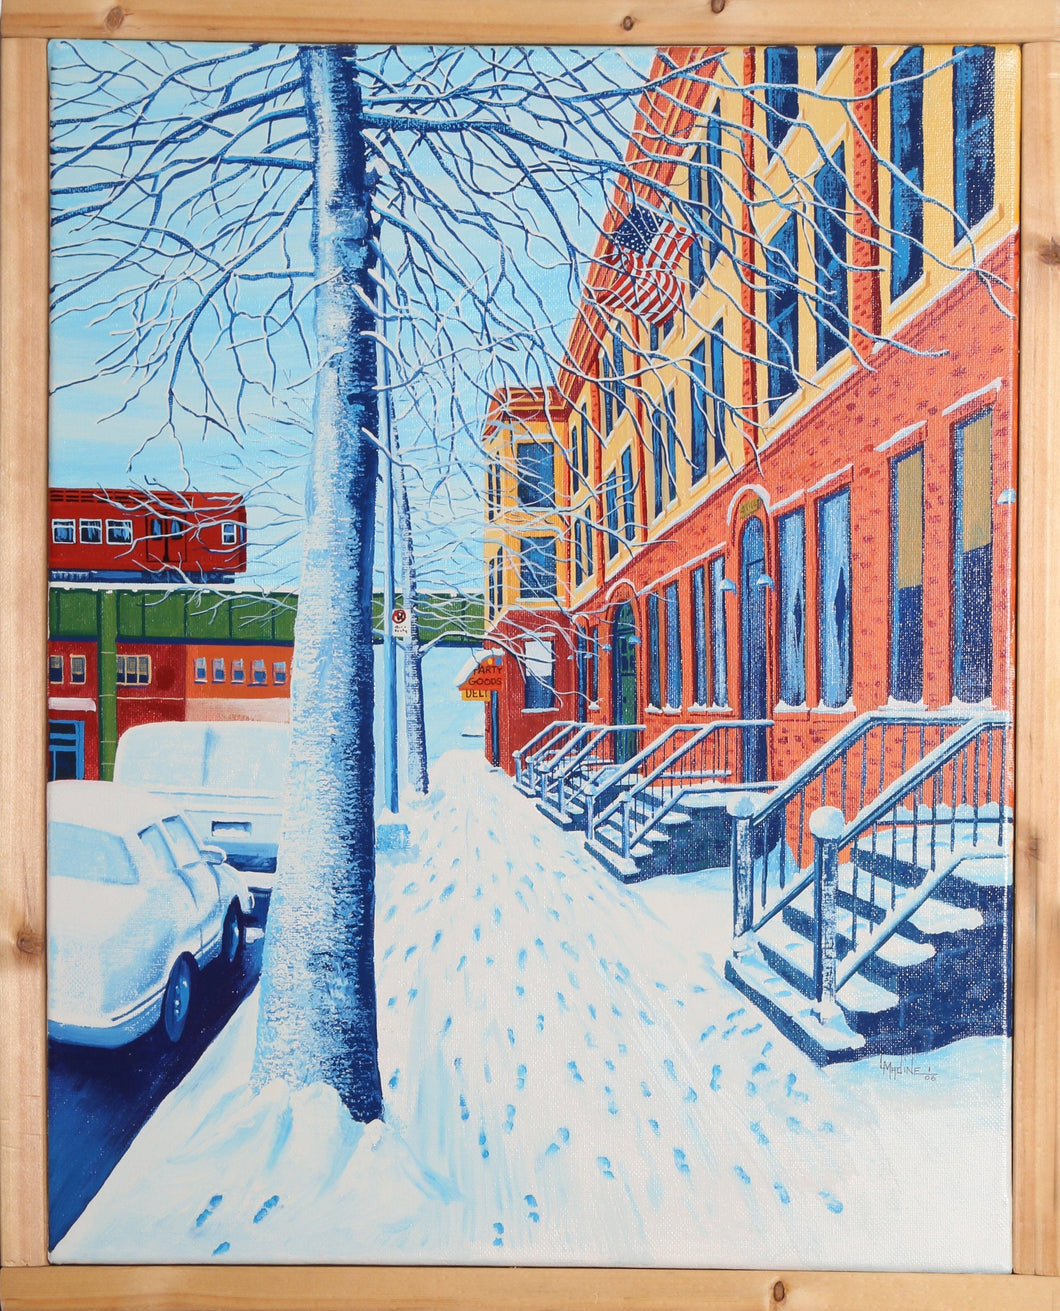 54th Street - Woodside, NY (Party Goods) Oil | Lawrence Madine,{{product.type}}